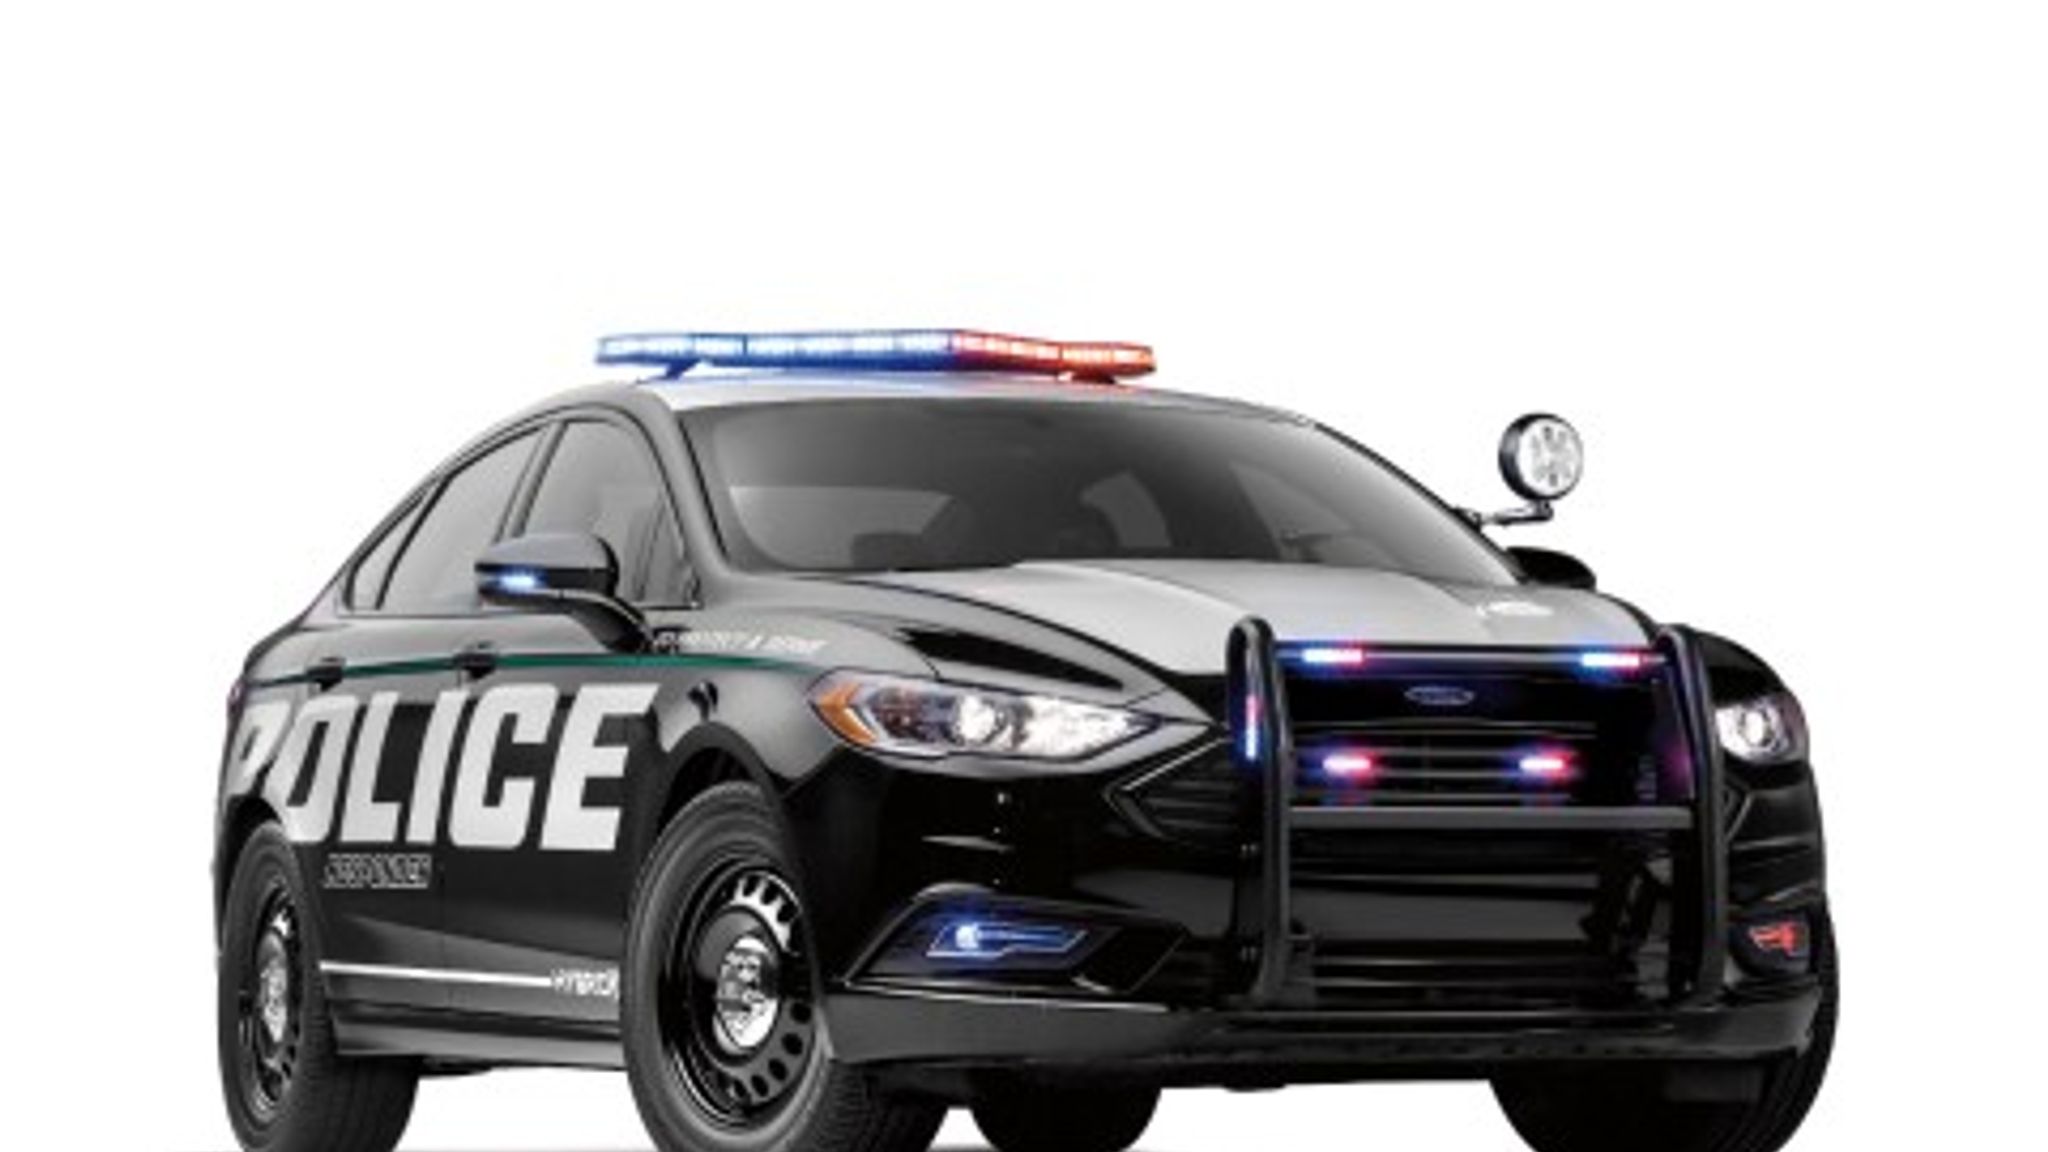 Ford Fusion Energi Police Car, Photos, Details, And Specs